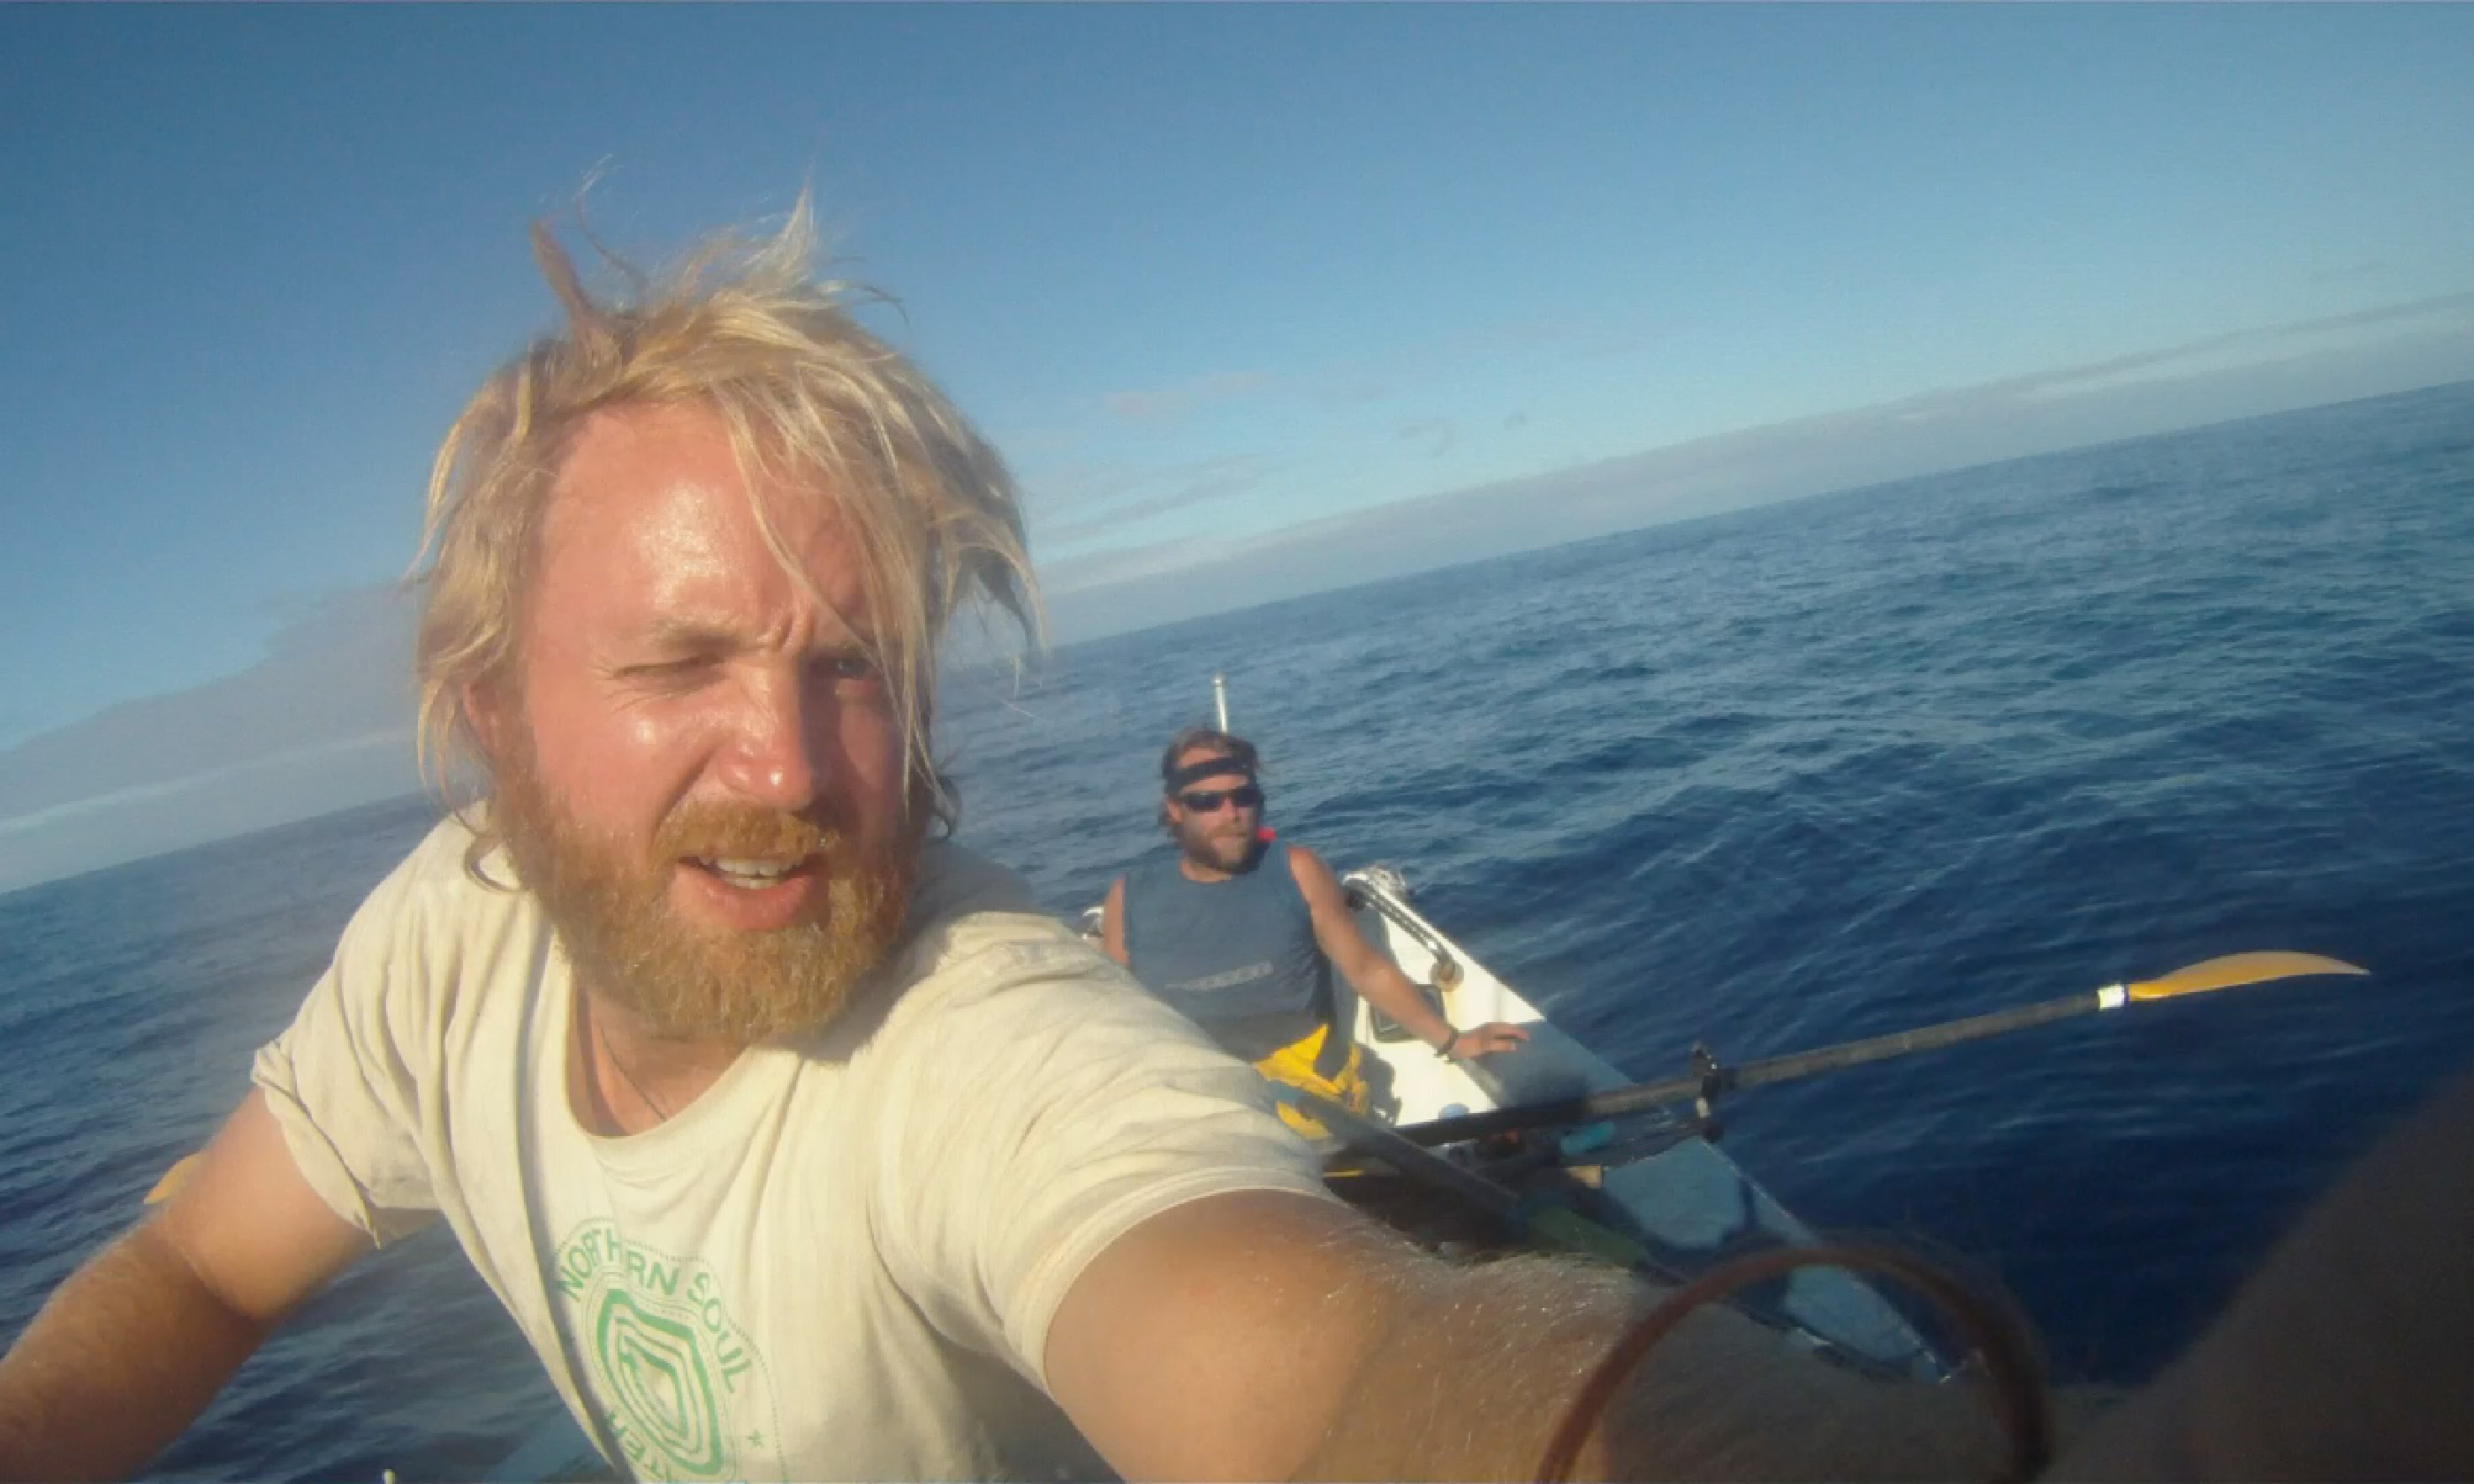 How to row 3,500 miles across the Indian Ocean (Image: James Adair)